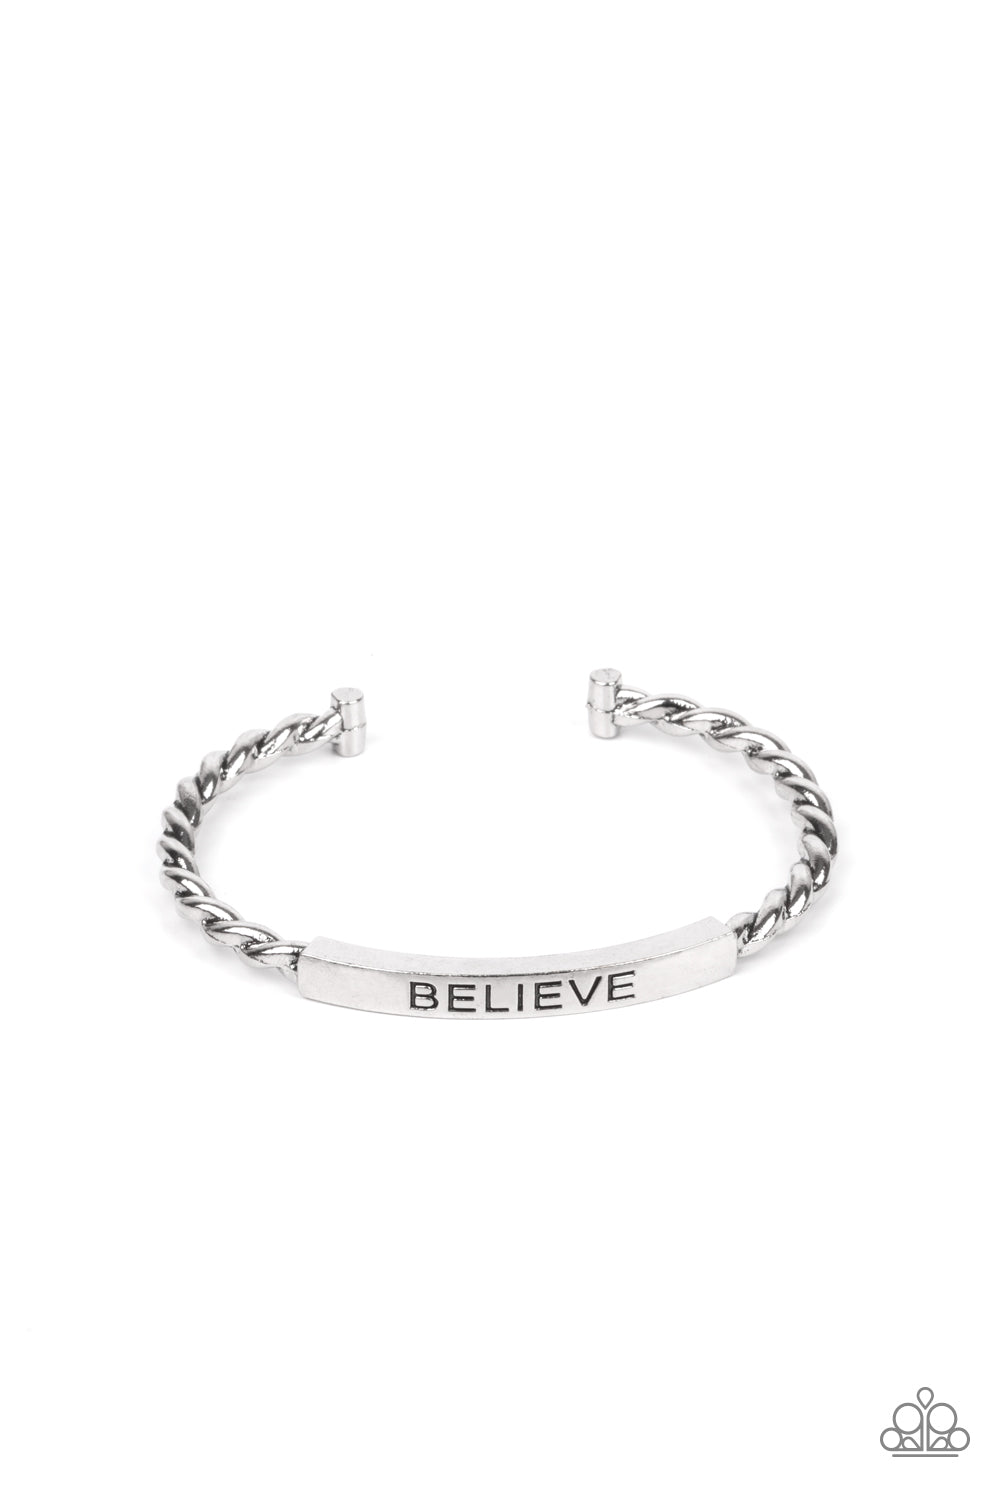 Keep Calm and Believe - Silver - Bracelets - Paparazzi Accessories